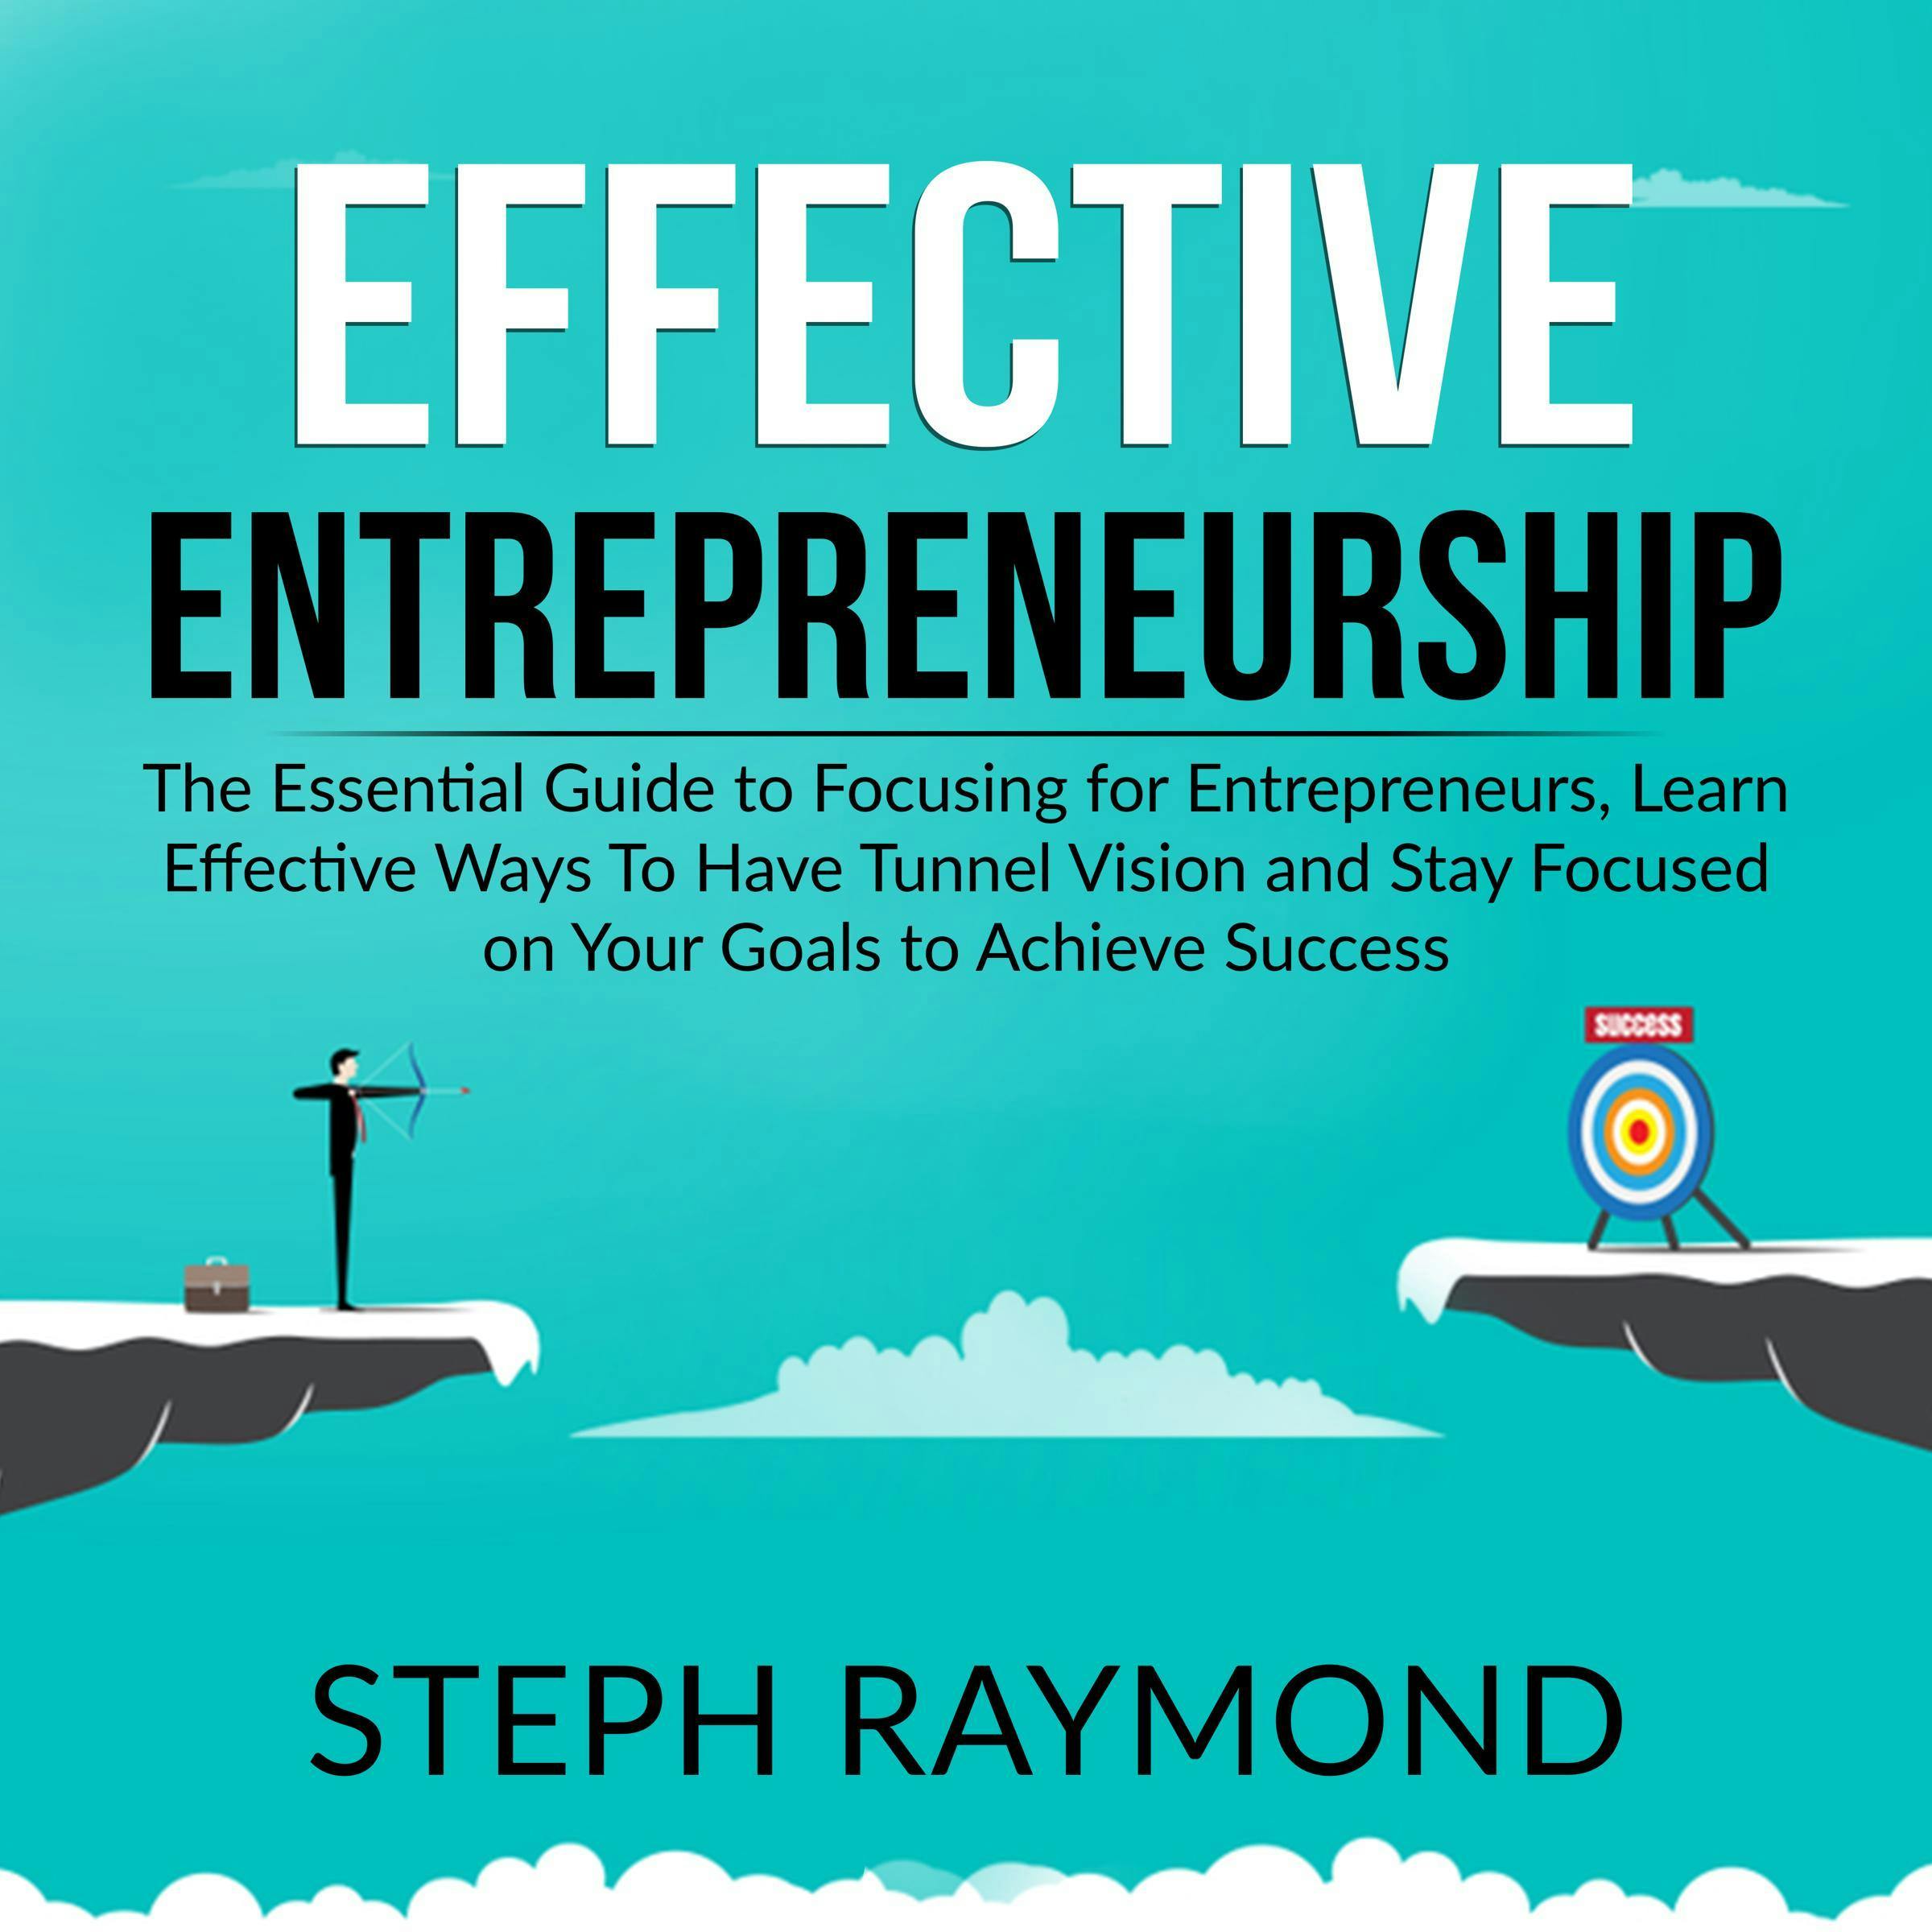 Effective Entrepreneurship: The Essential Guide to Focusing for Entrepreneurs, Learn Effective Ways To Have Tunnel Vision and Stay Focused on Your Goals to Achieve Success - undefined